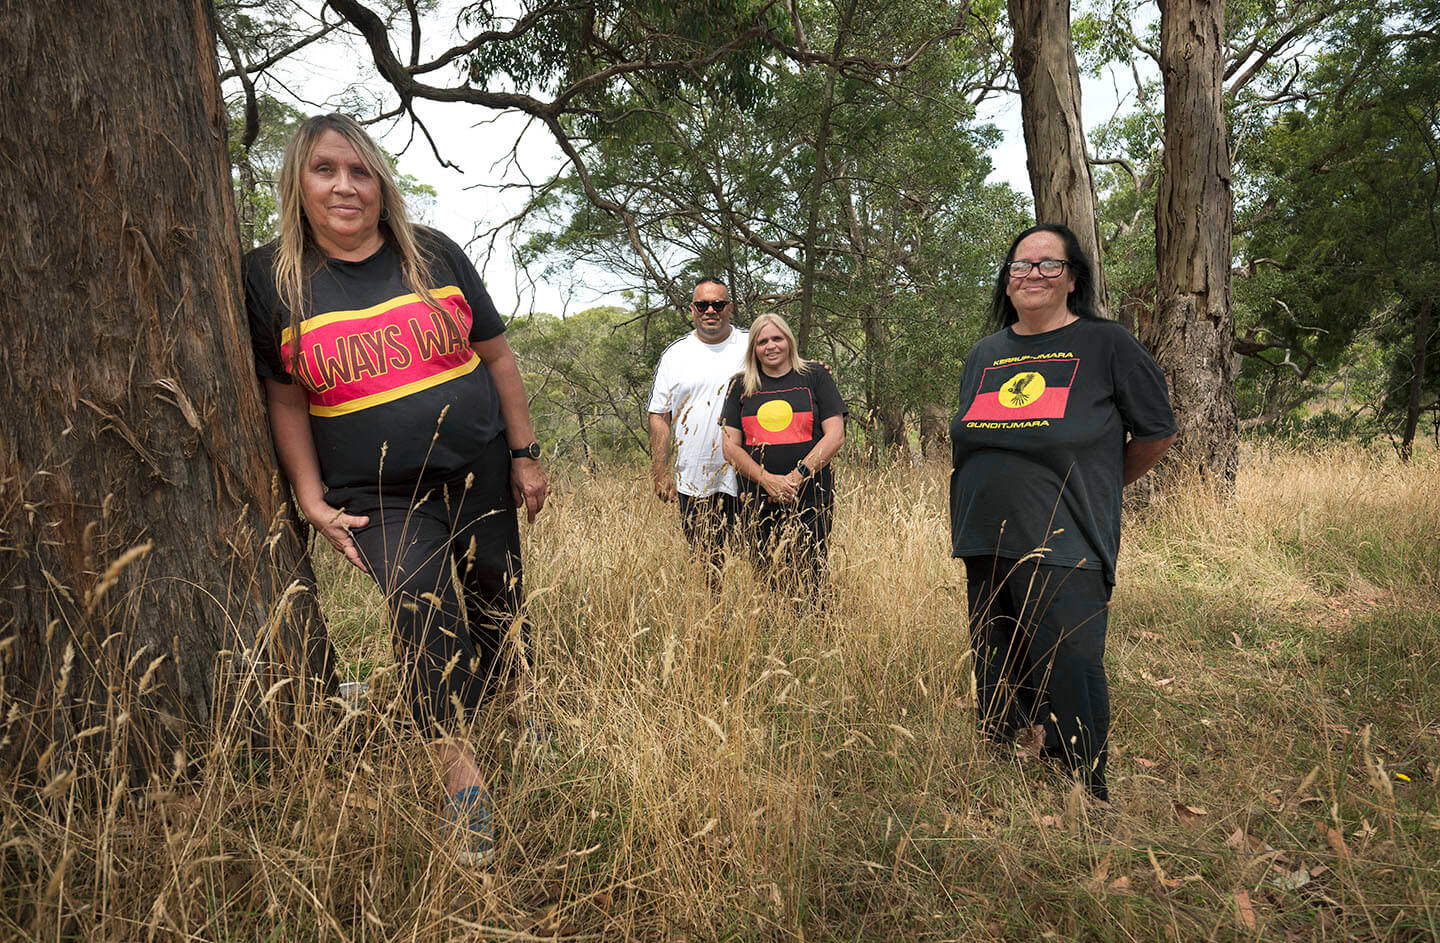 The Wright family standing out in high grassland next to gum trees.